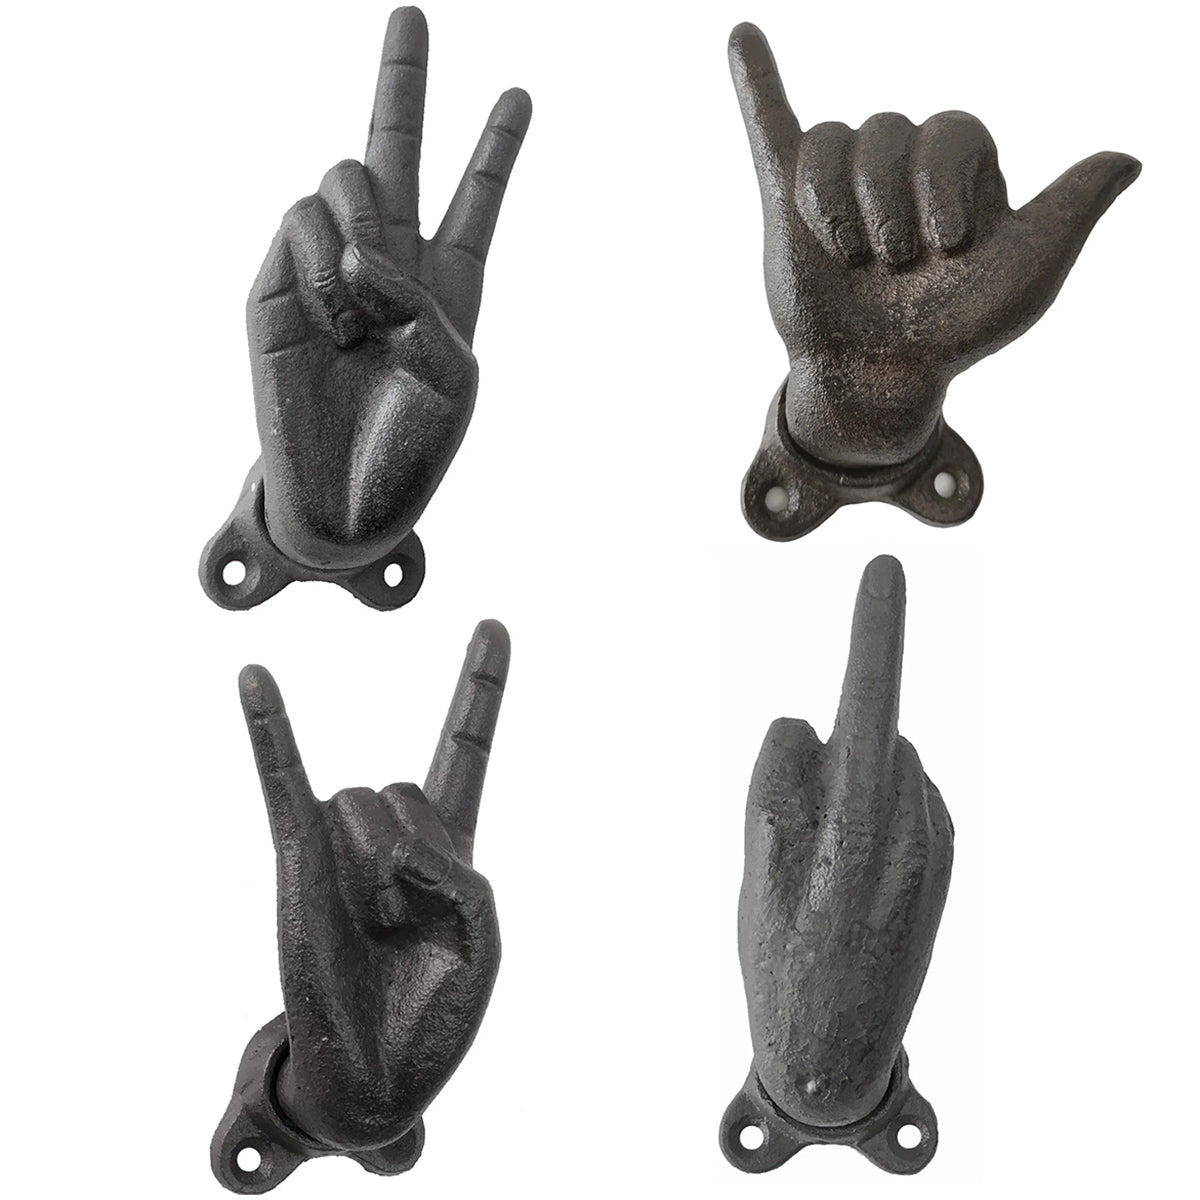  Interior Illusions Middle Finger Hand Wall Hook 9